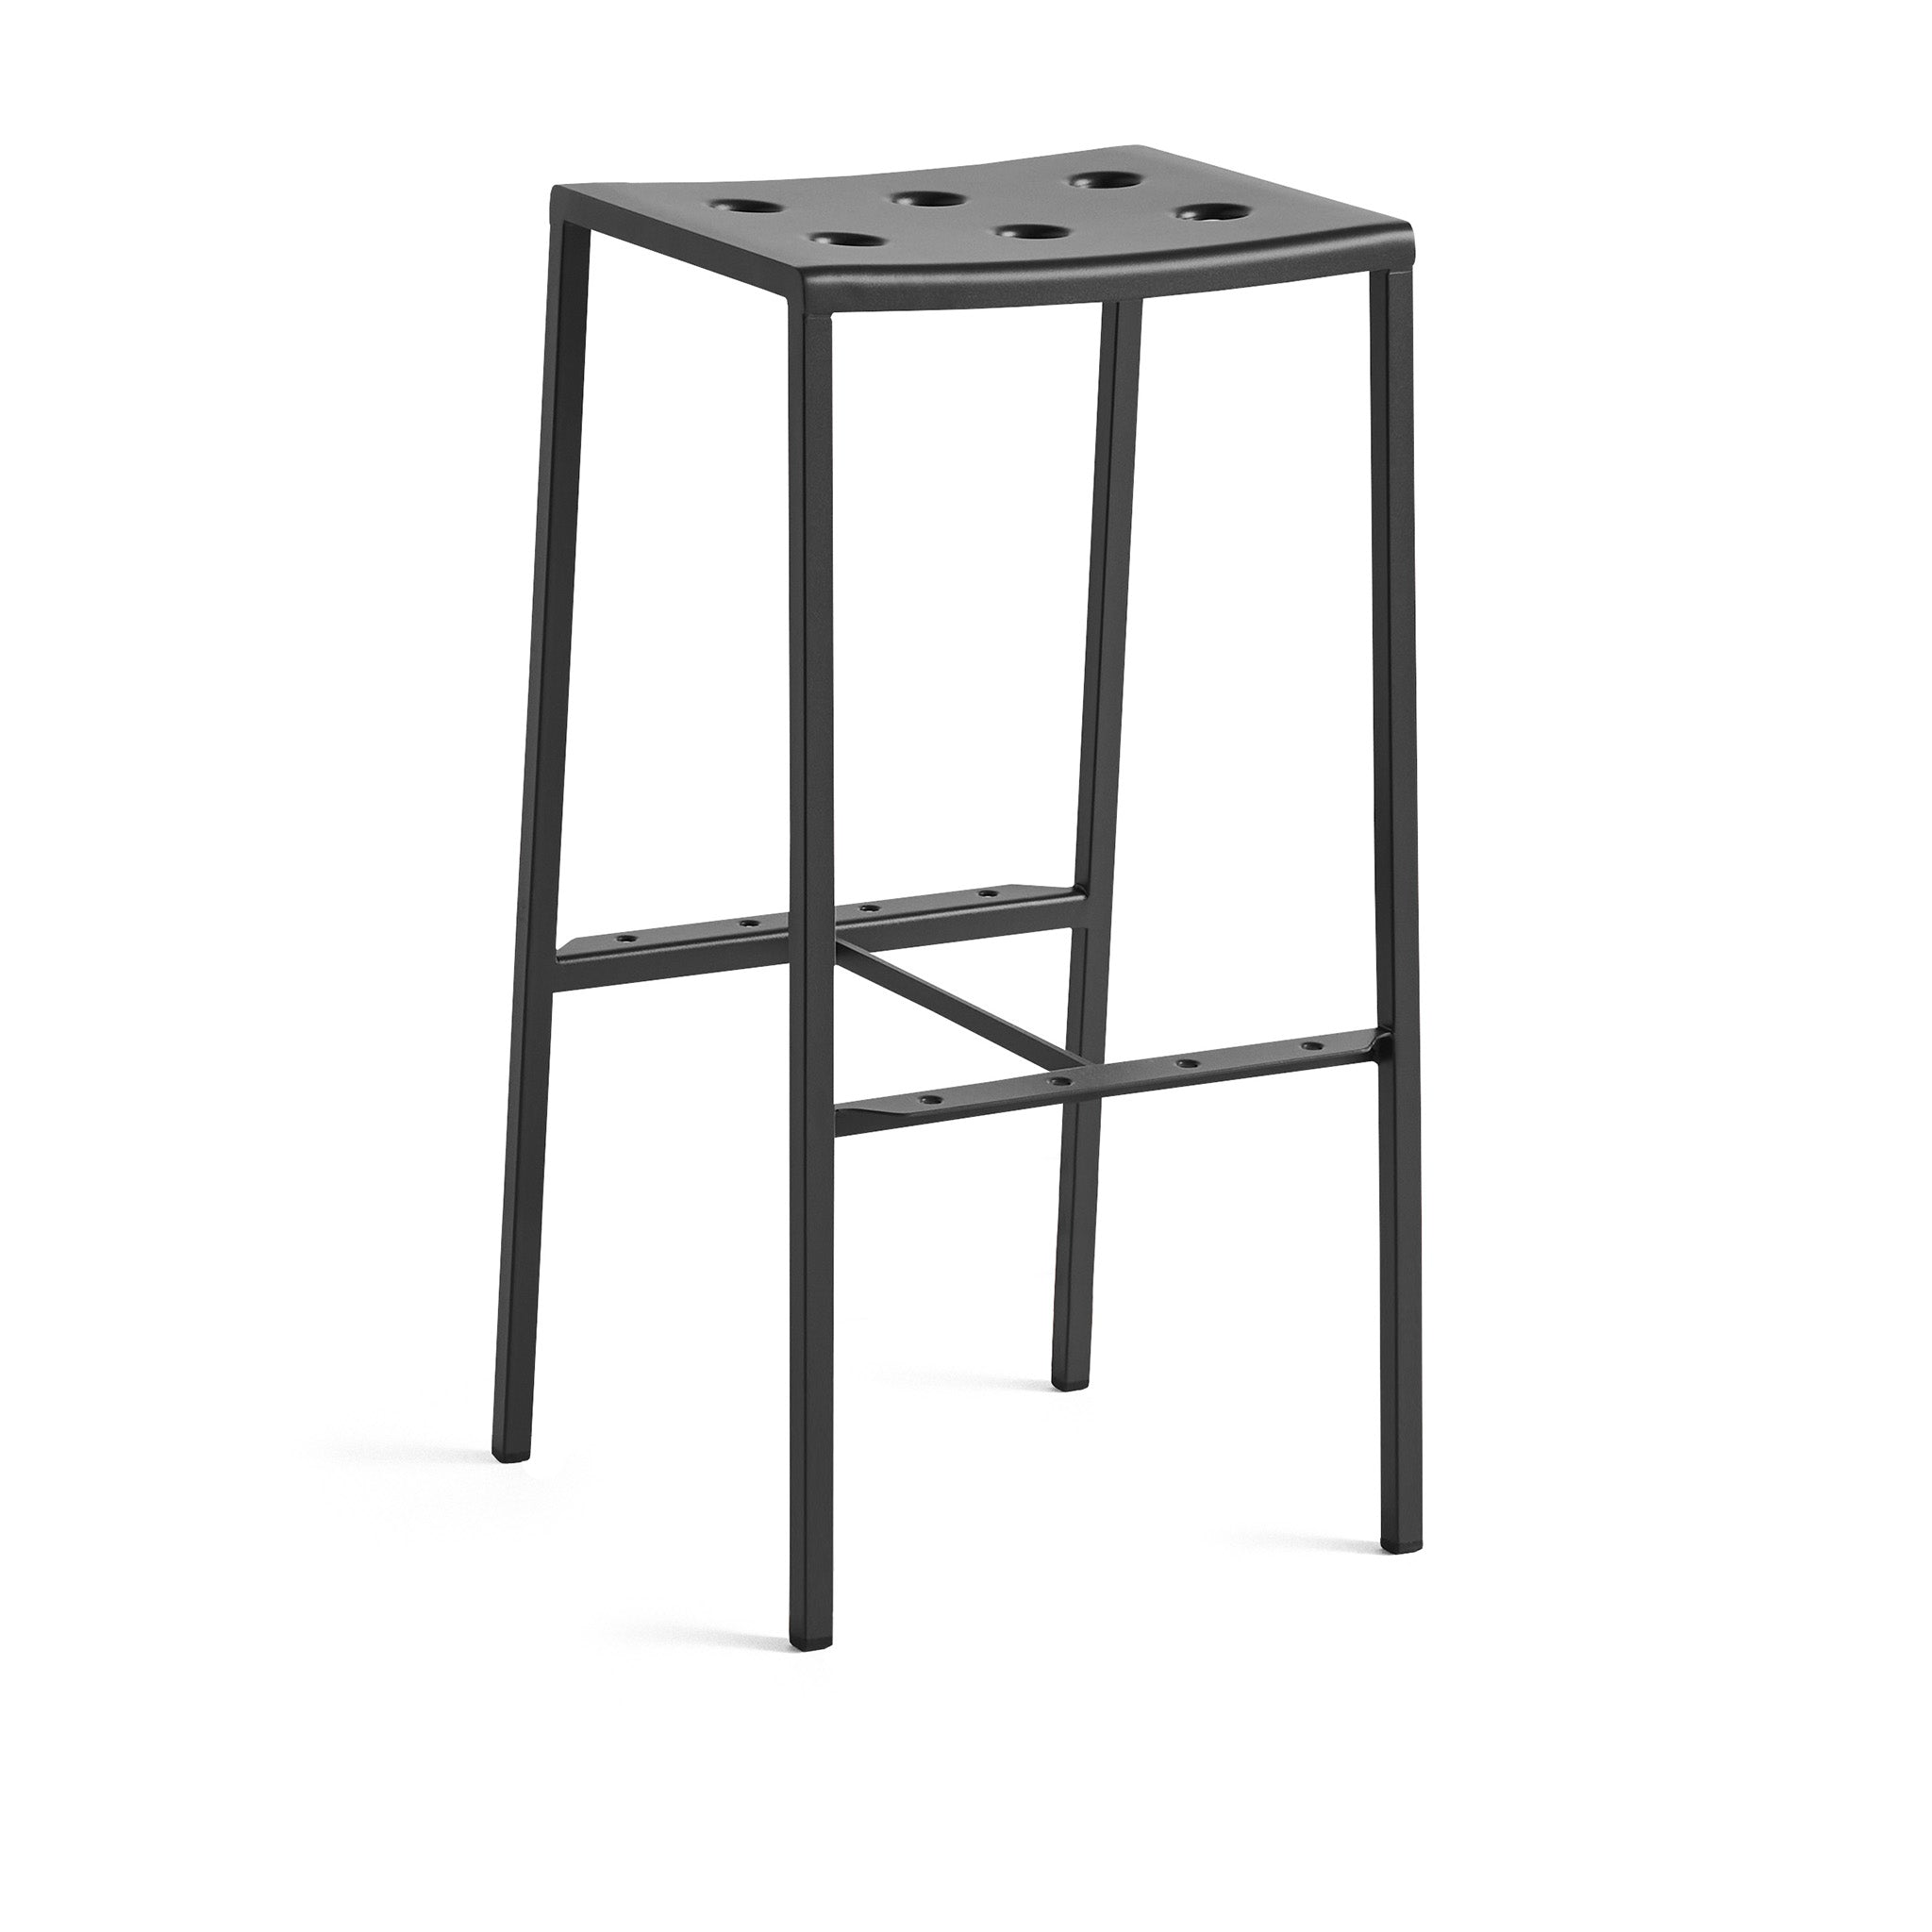 Balcony Bar Stool By Ronan and Erwan Bouroullec for Hay